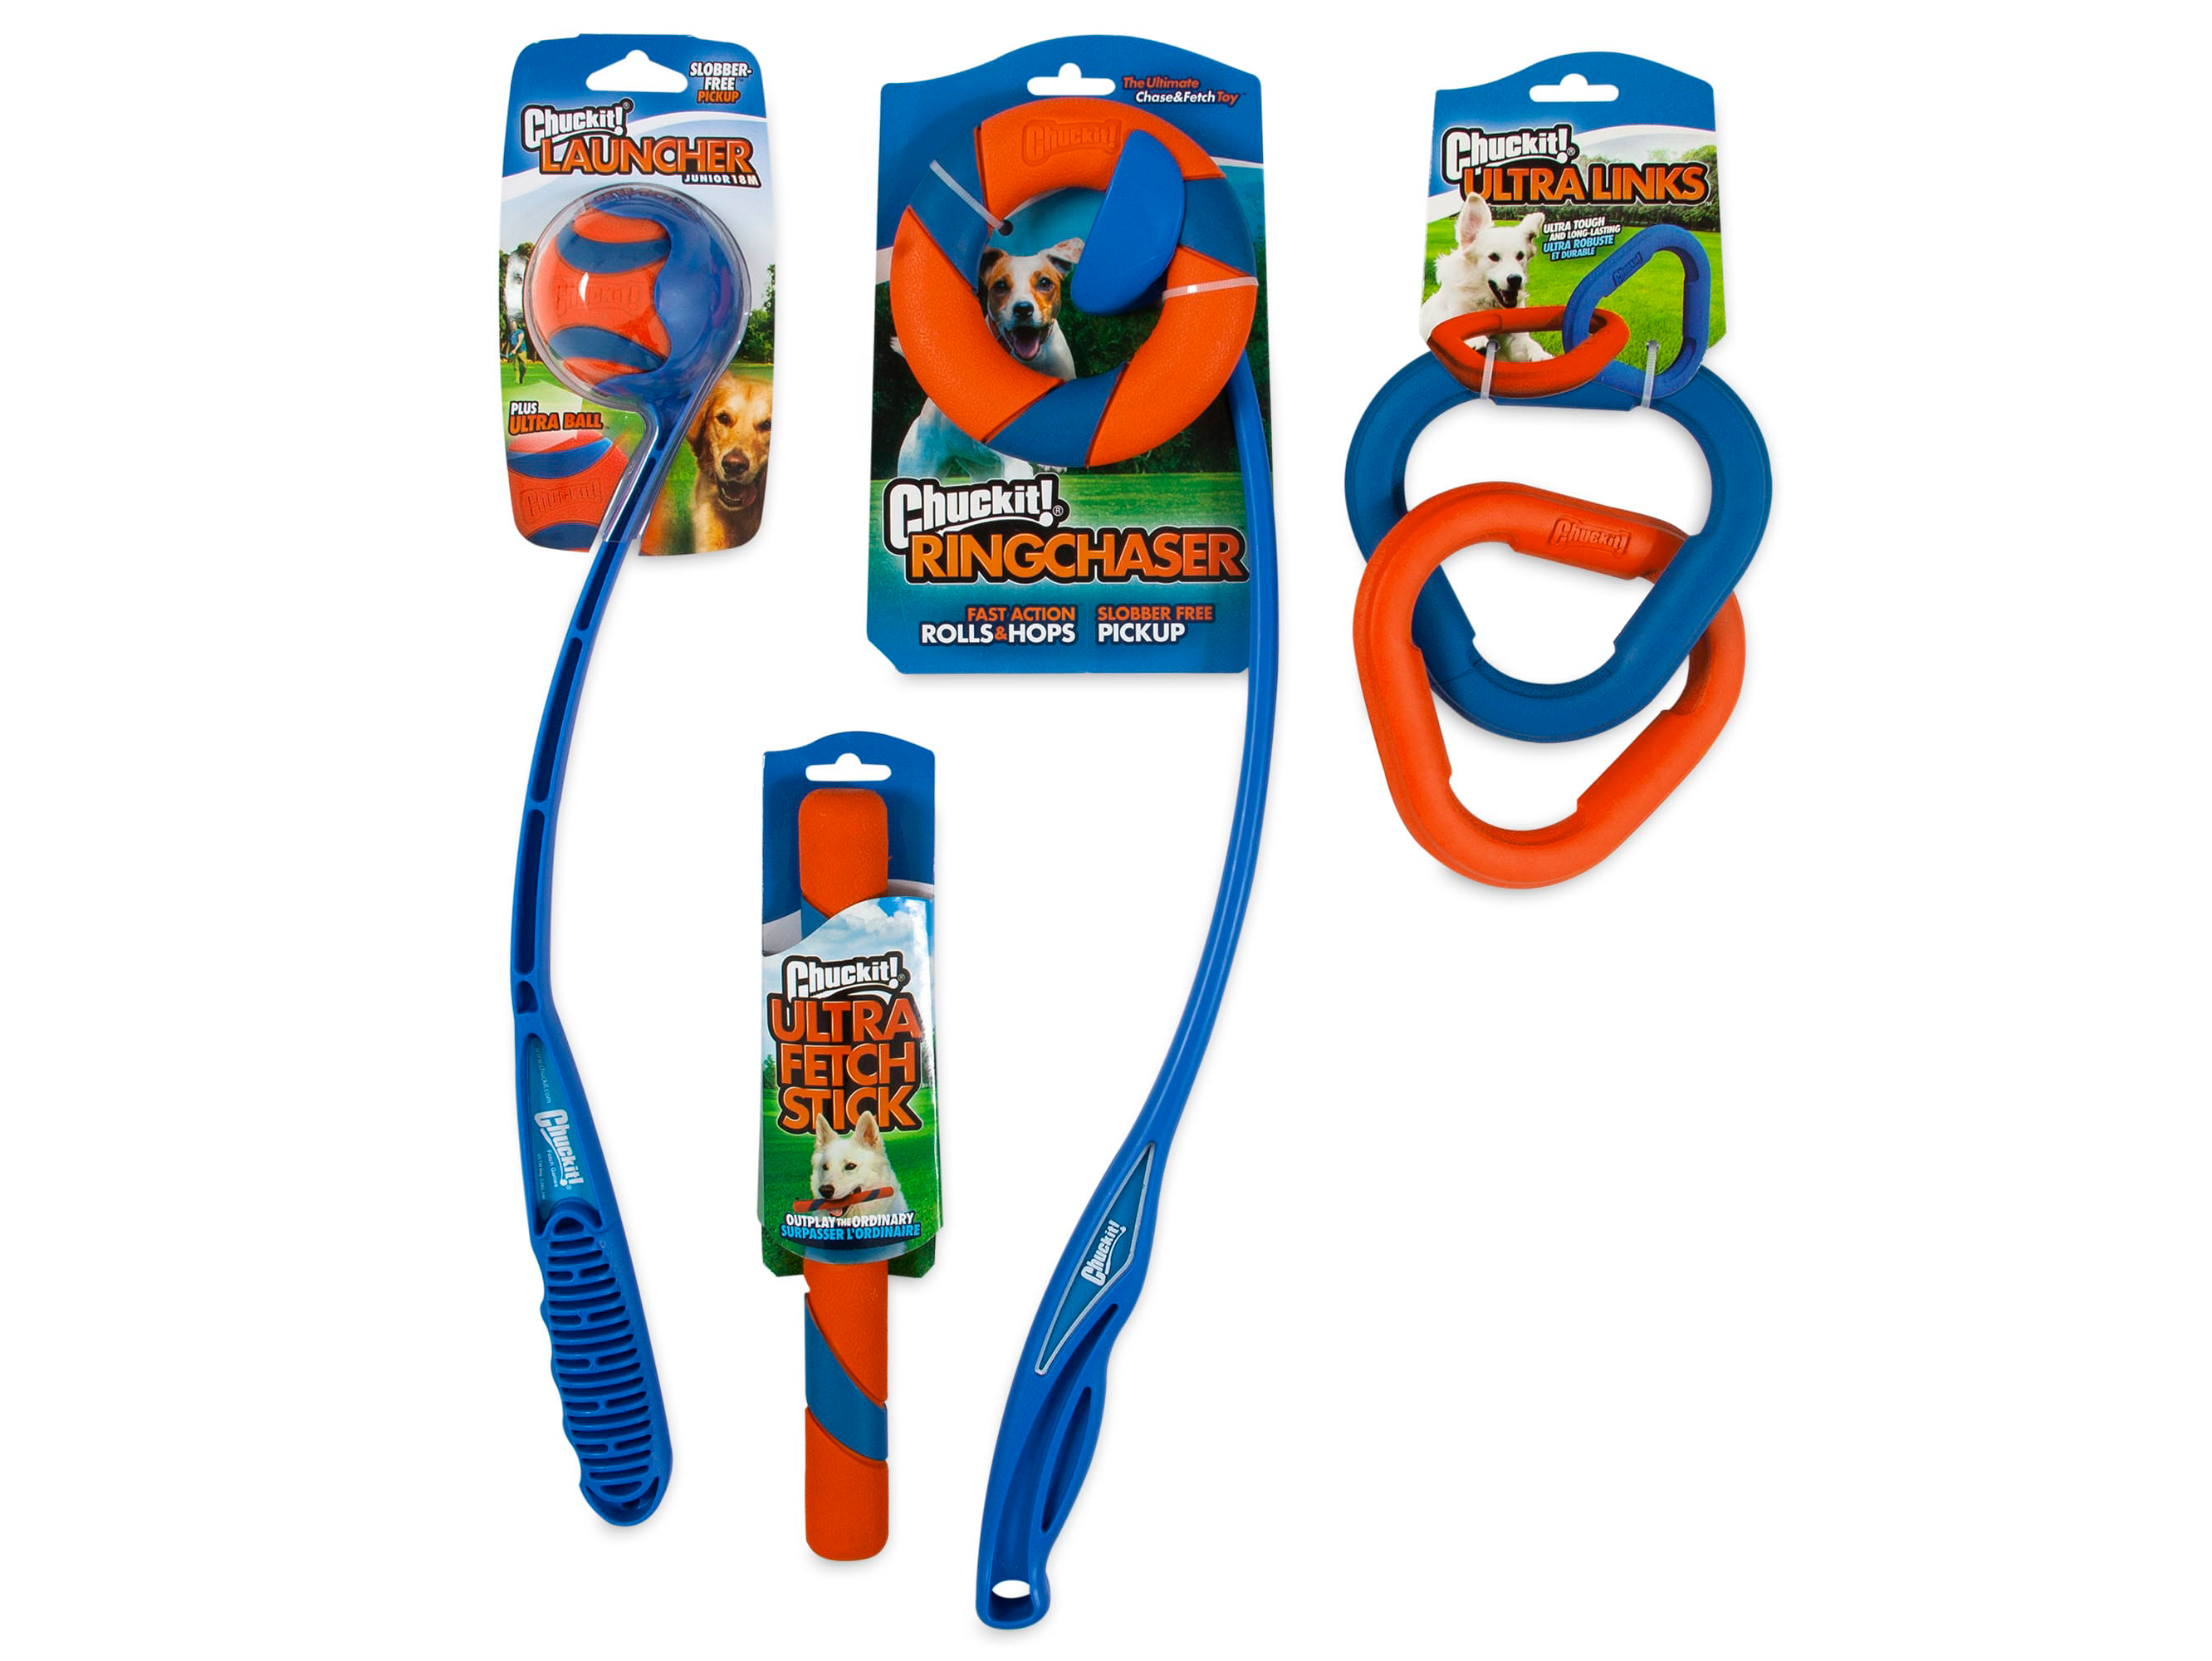 Pack of four items for dogs: a launcher, a ringchaser, a fetch stick, and rubber links.